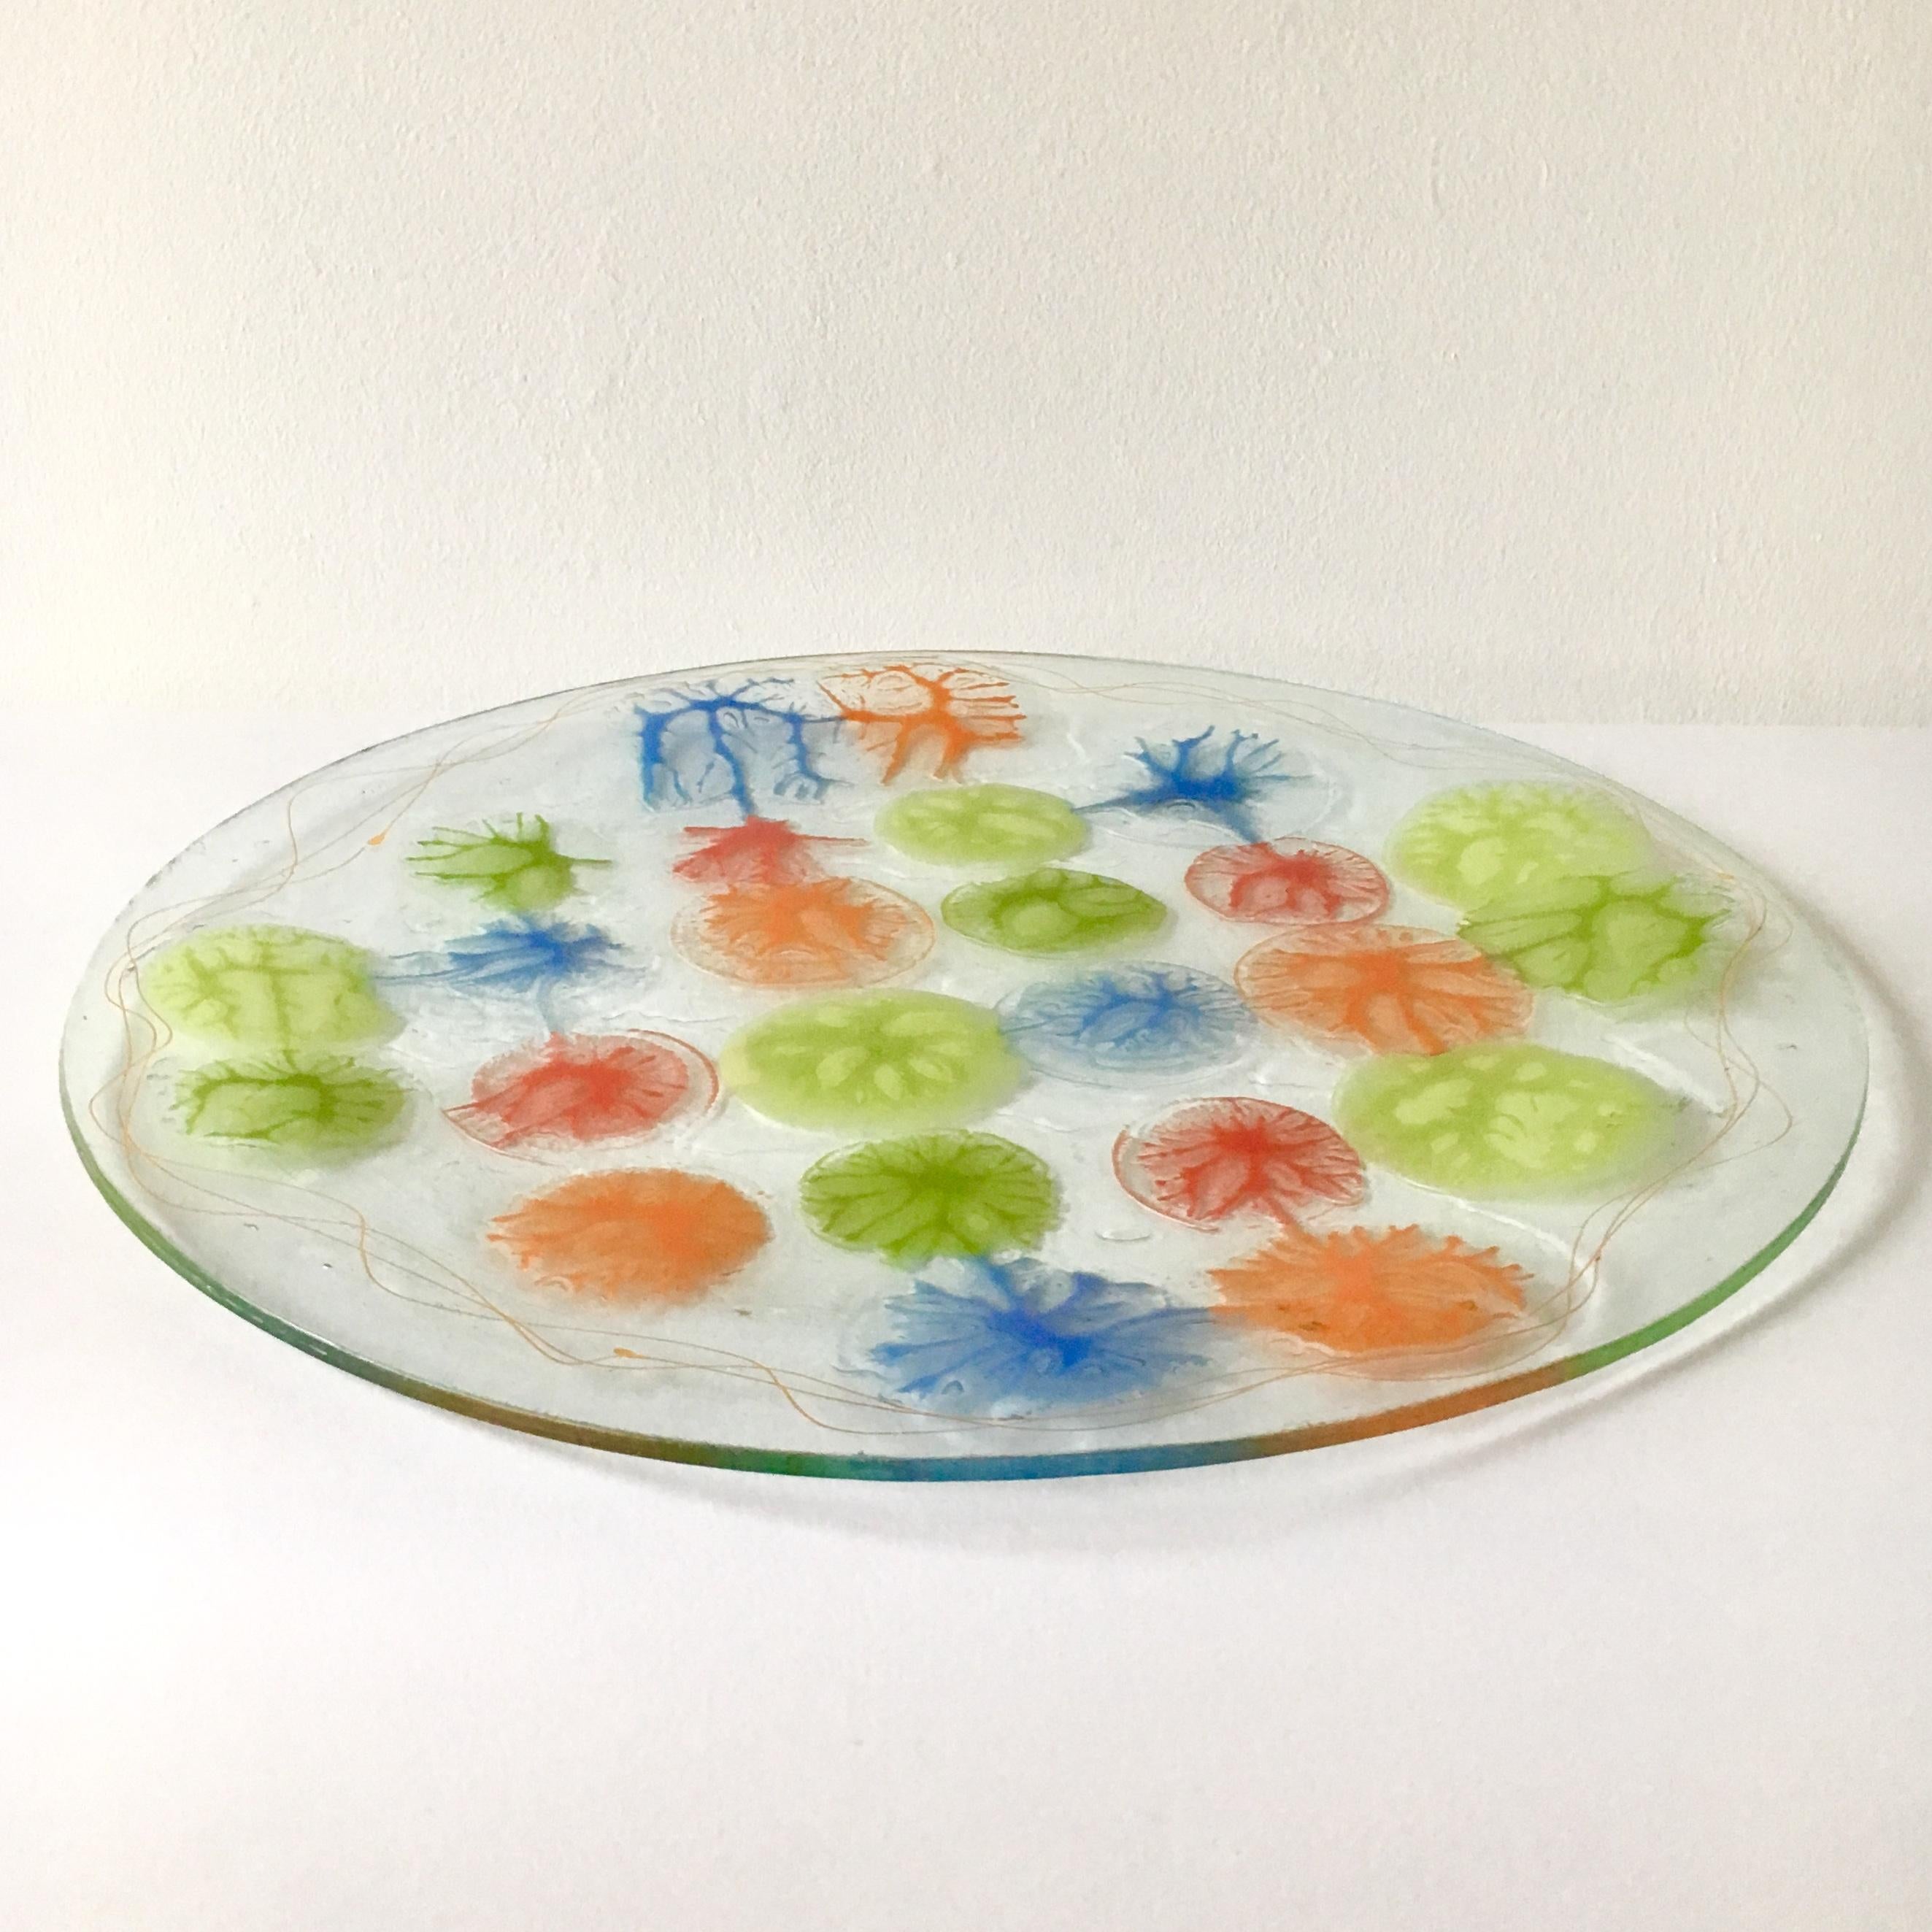 An abstract coral circular fused studio glass plate by Michael and Frances Higgins USA etched signature, late 1960-early 1970s

Michael Higgins (1908-1999) and Frances Higgins(1912-2004) met in Chicago and were married in 1948. They had a